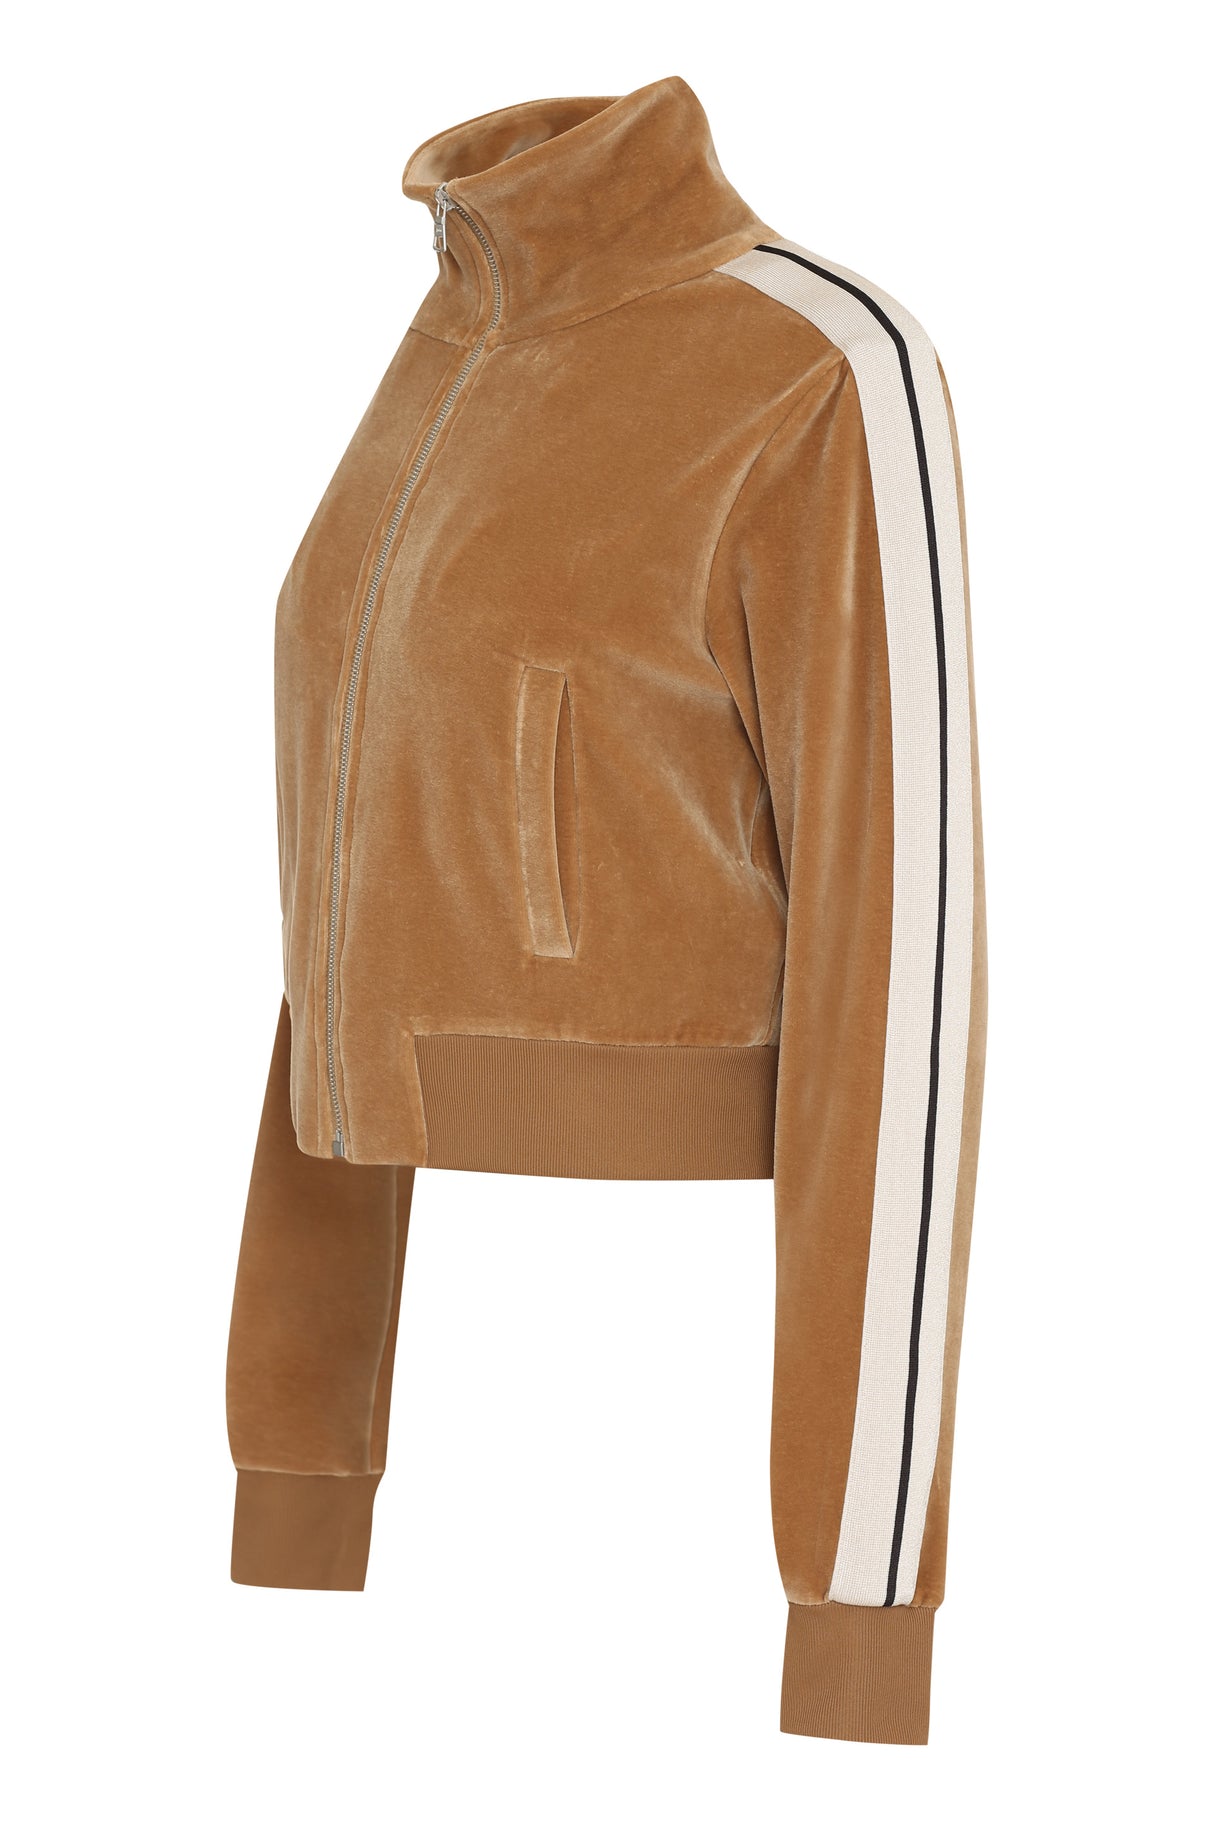 PALM ANGELS Chenille Logo Sweatshirt with Stand Up Collar and Contrasting Sleeves Bands in Camel